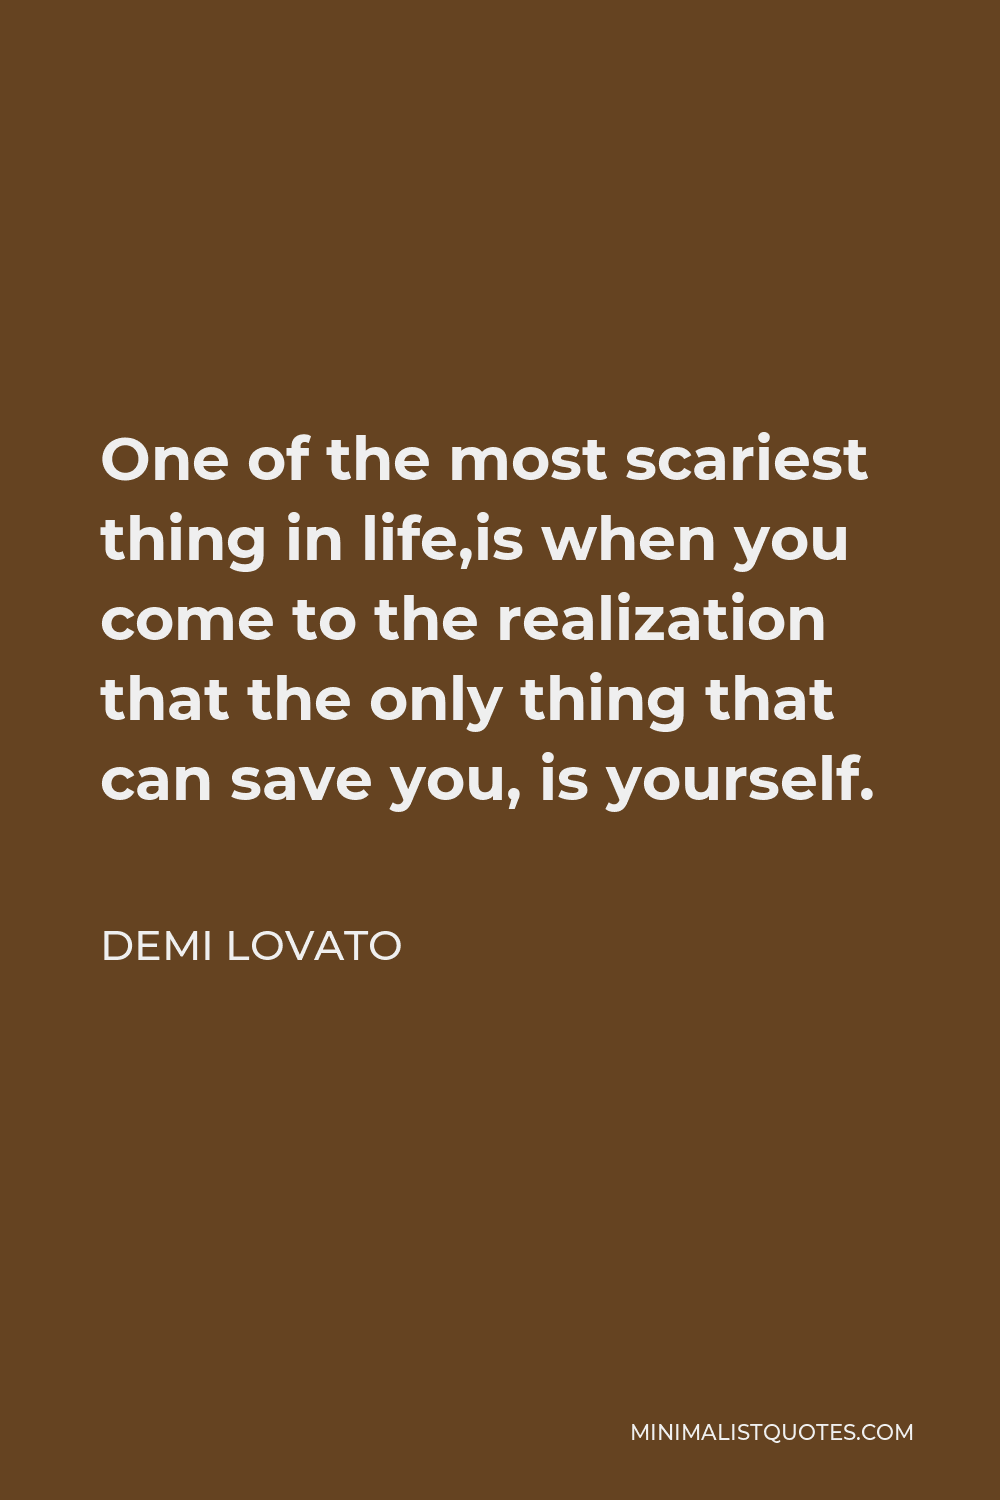 Demi Lovato Quote - One of the most scariest thing in life,is when you come to the realization that the only thing that can save you, is yourself.